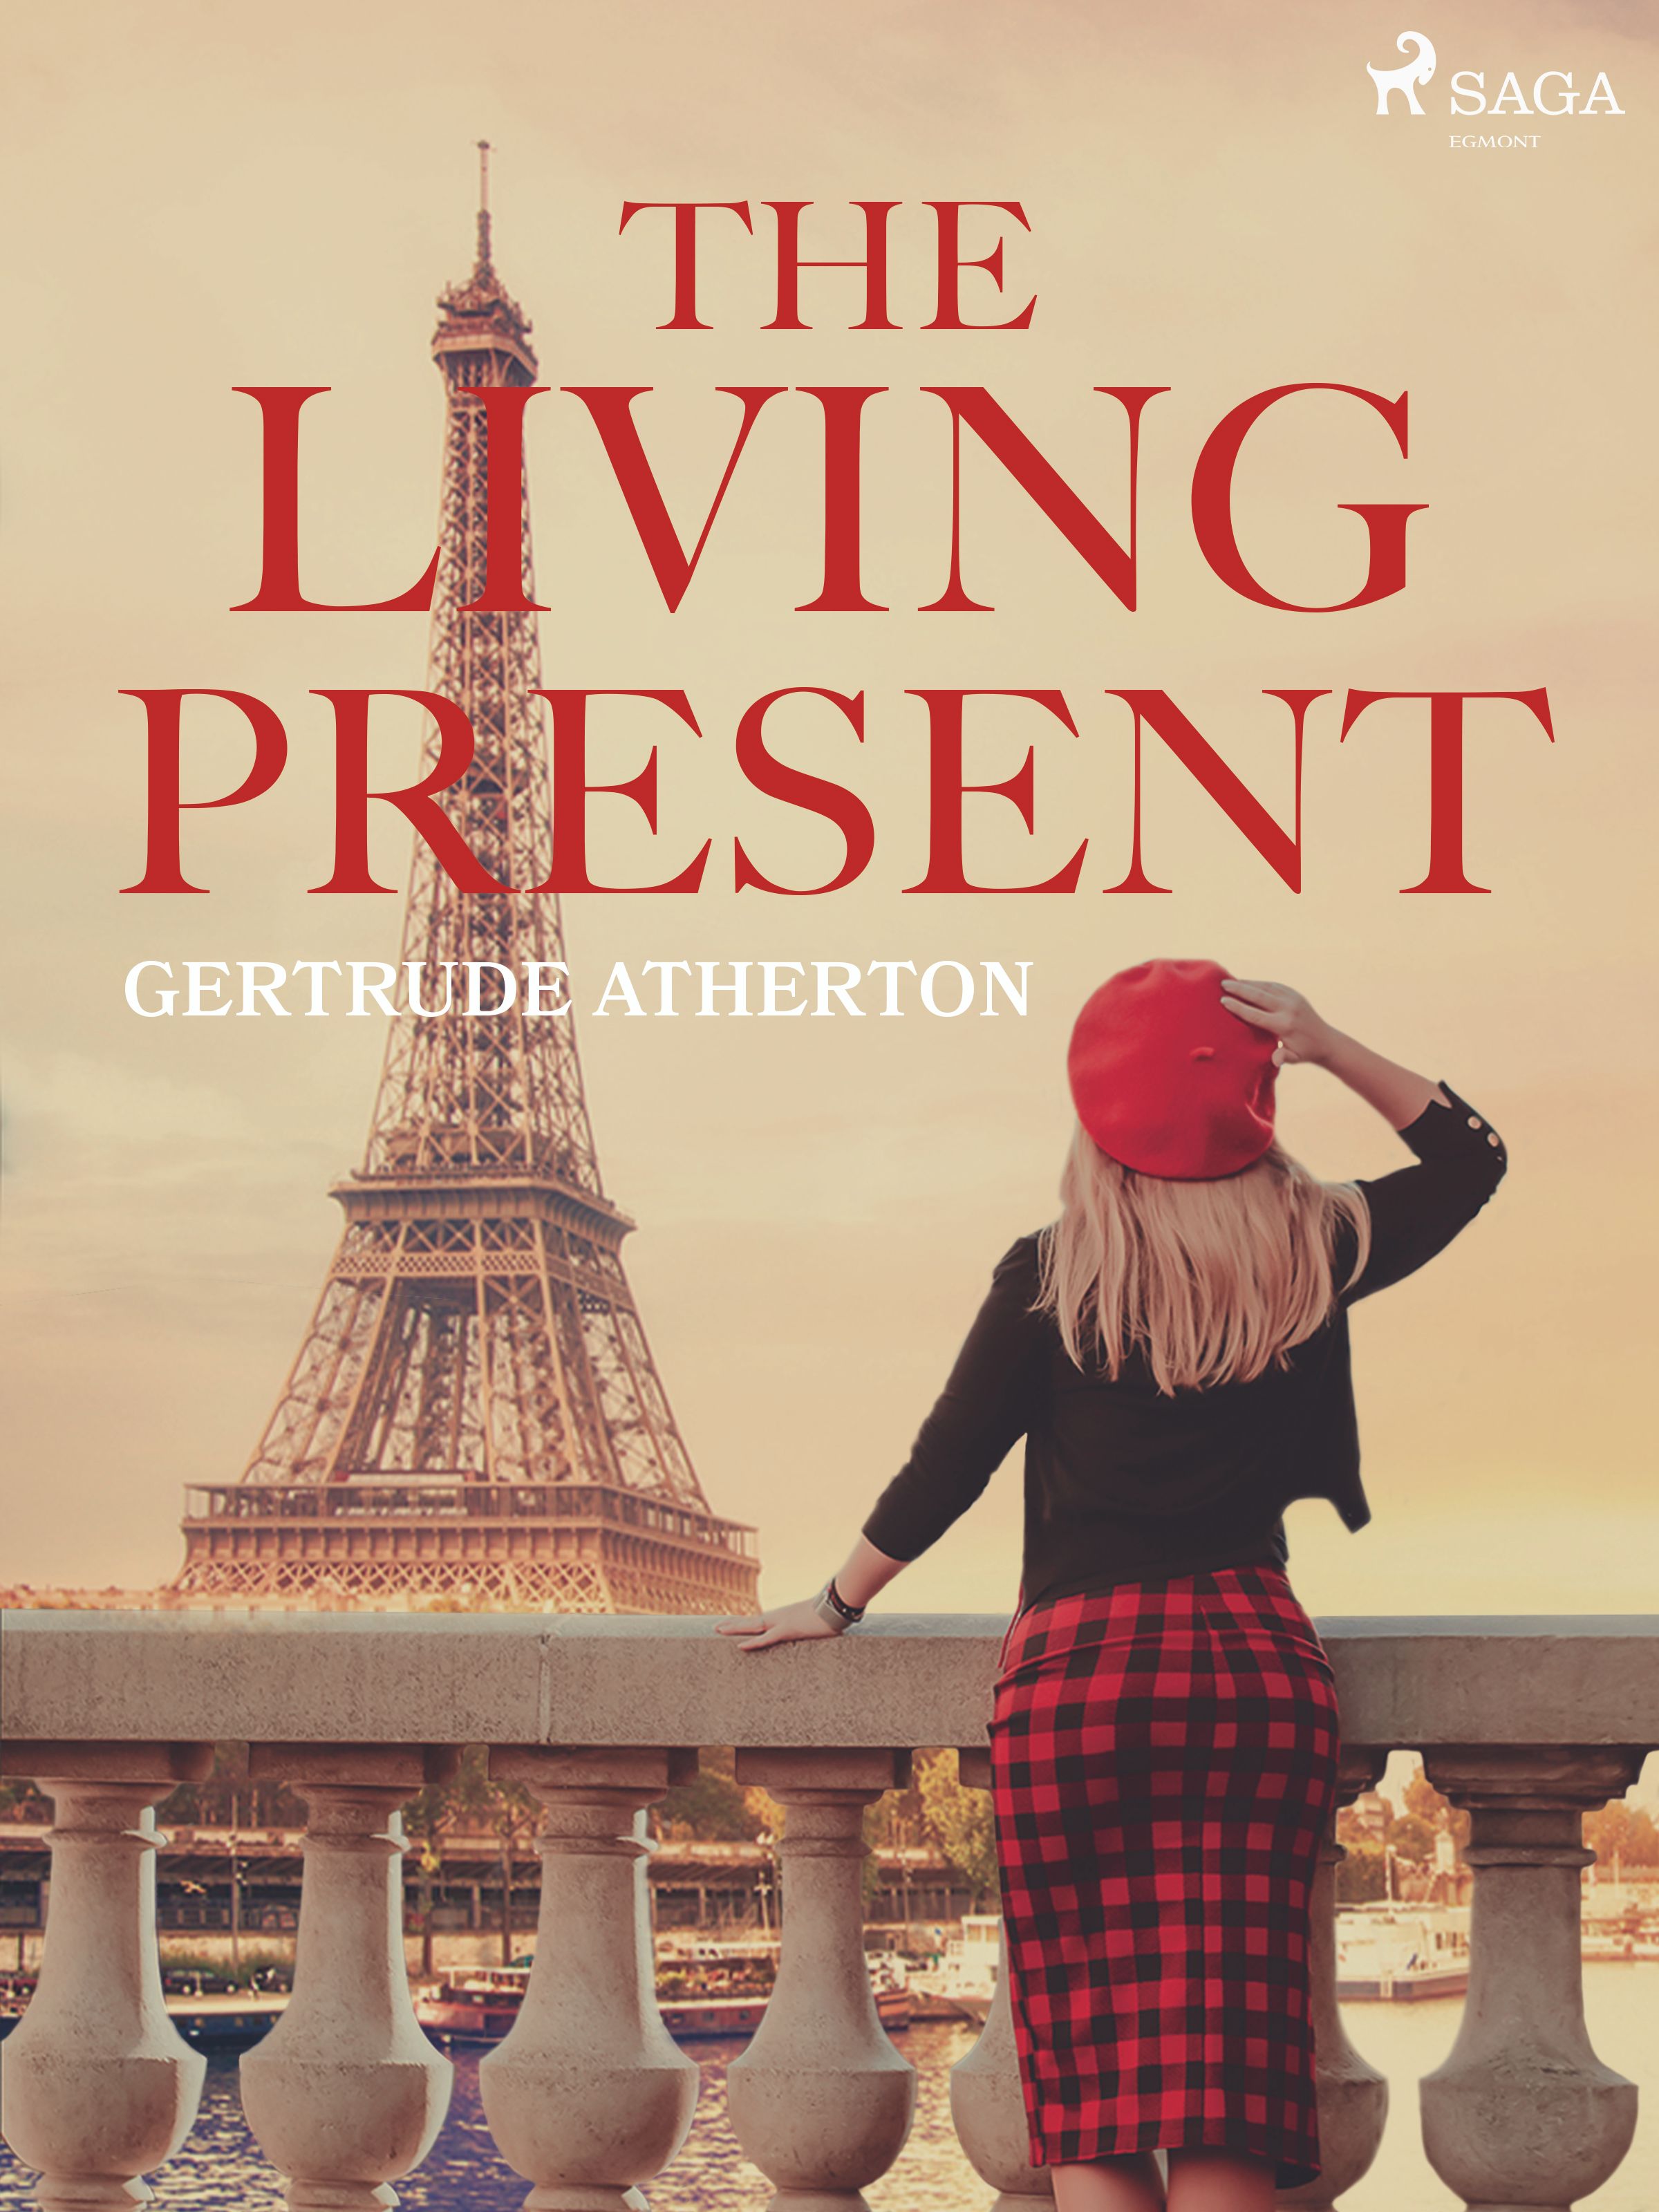 The Living Present, eBook by Gertrude Atherton